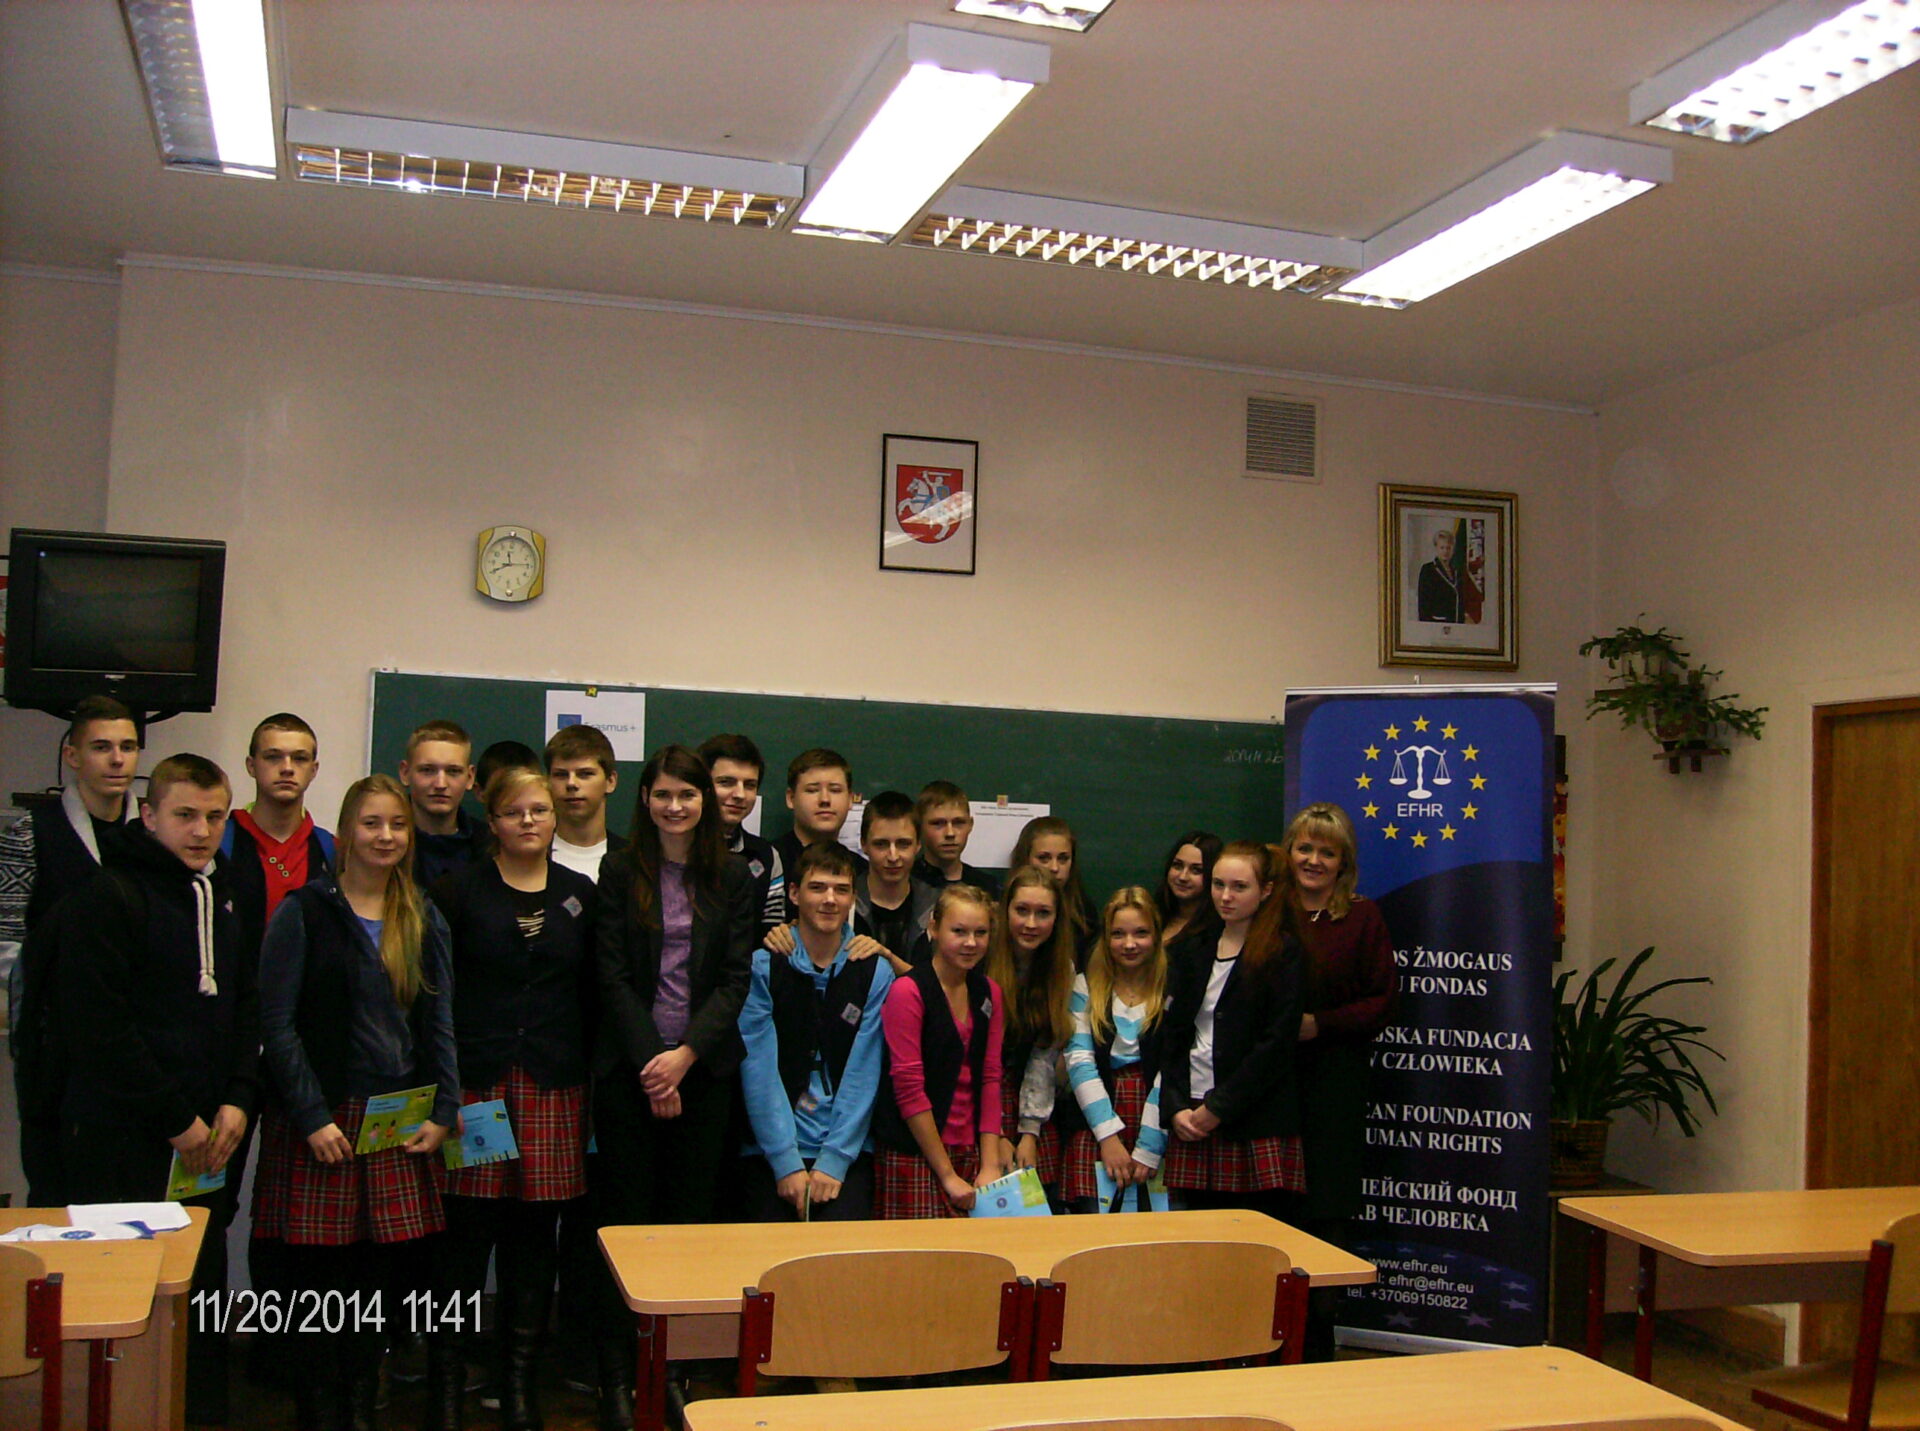 EFHR has conducted workshops on human rights in Polish schools